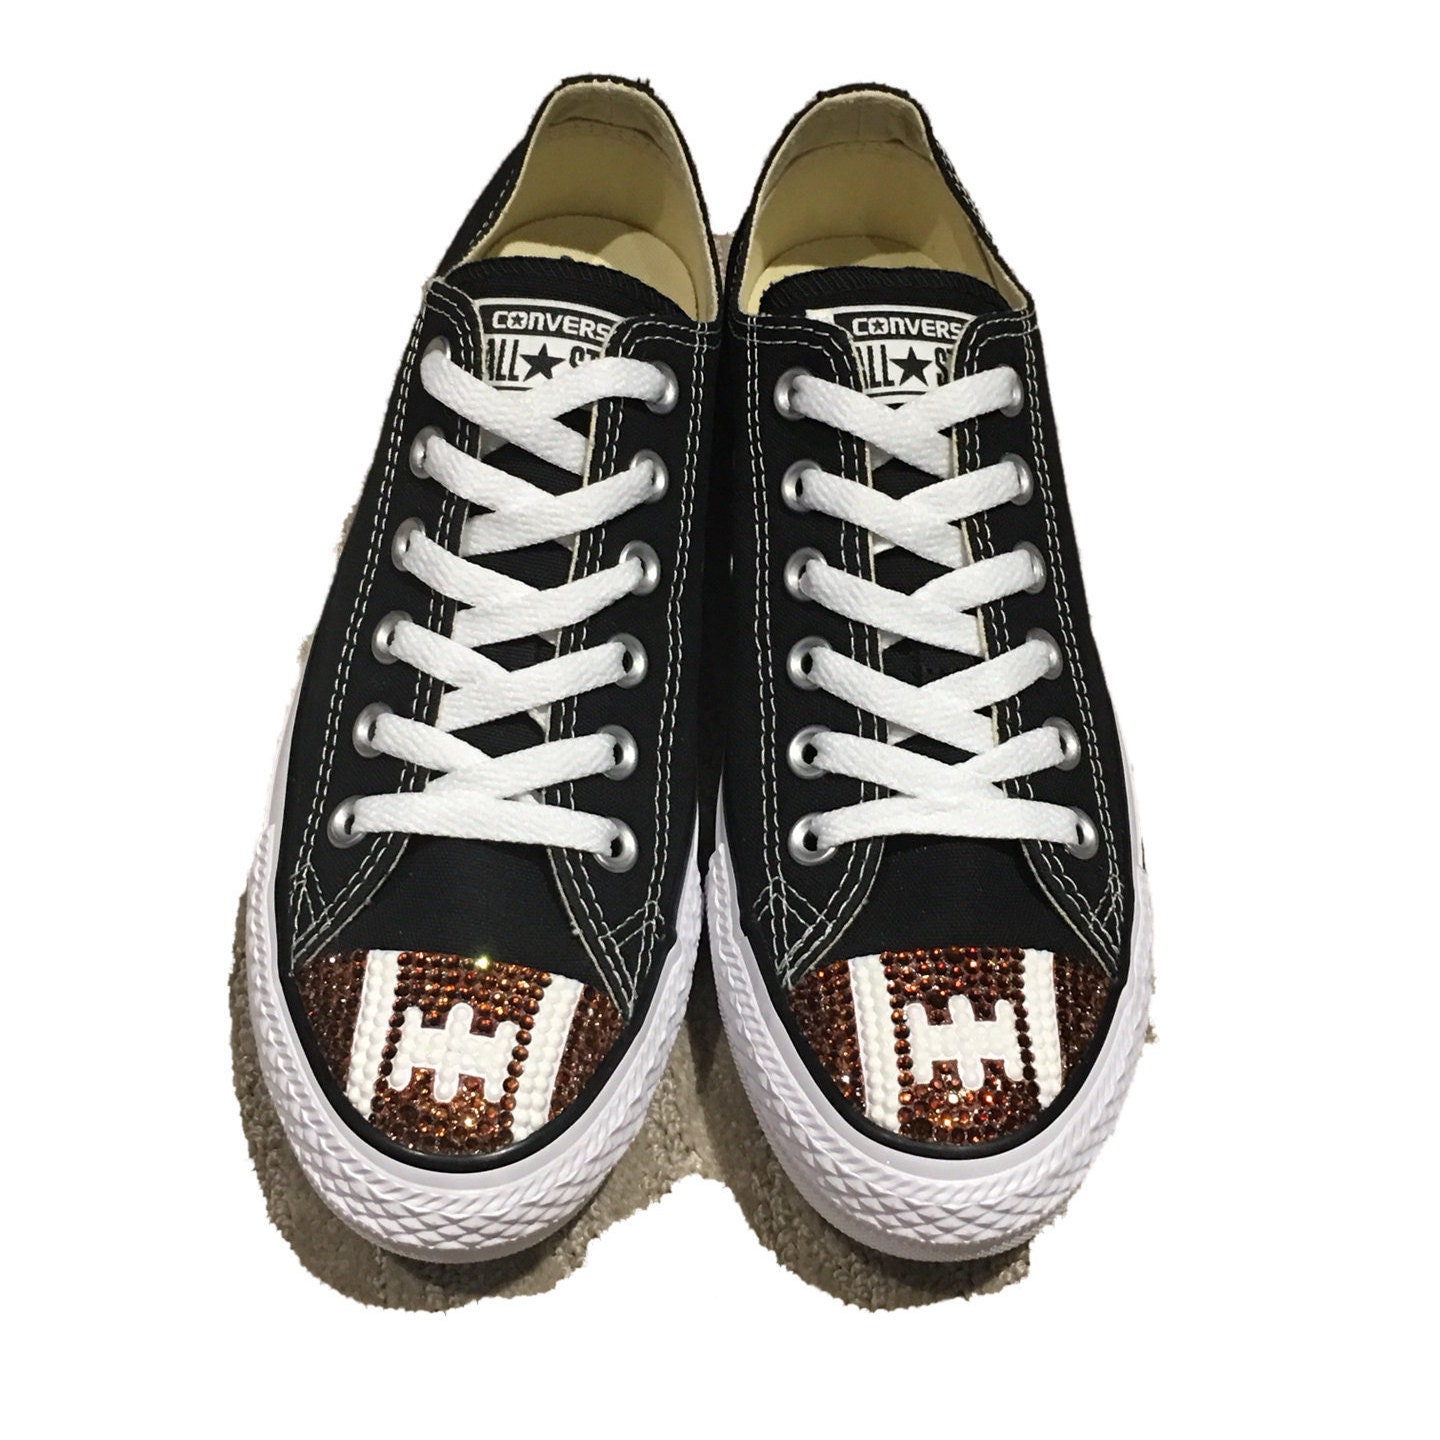 Football Blinged Converse Shoes. Custom Football Converse. Women's Football Shoes. Football Gift Idea, Football Mom Gift. Super Bowl Outfit